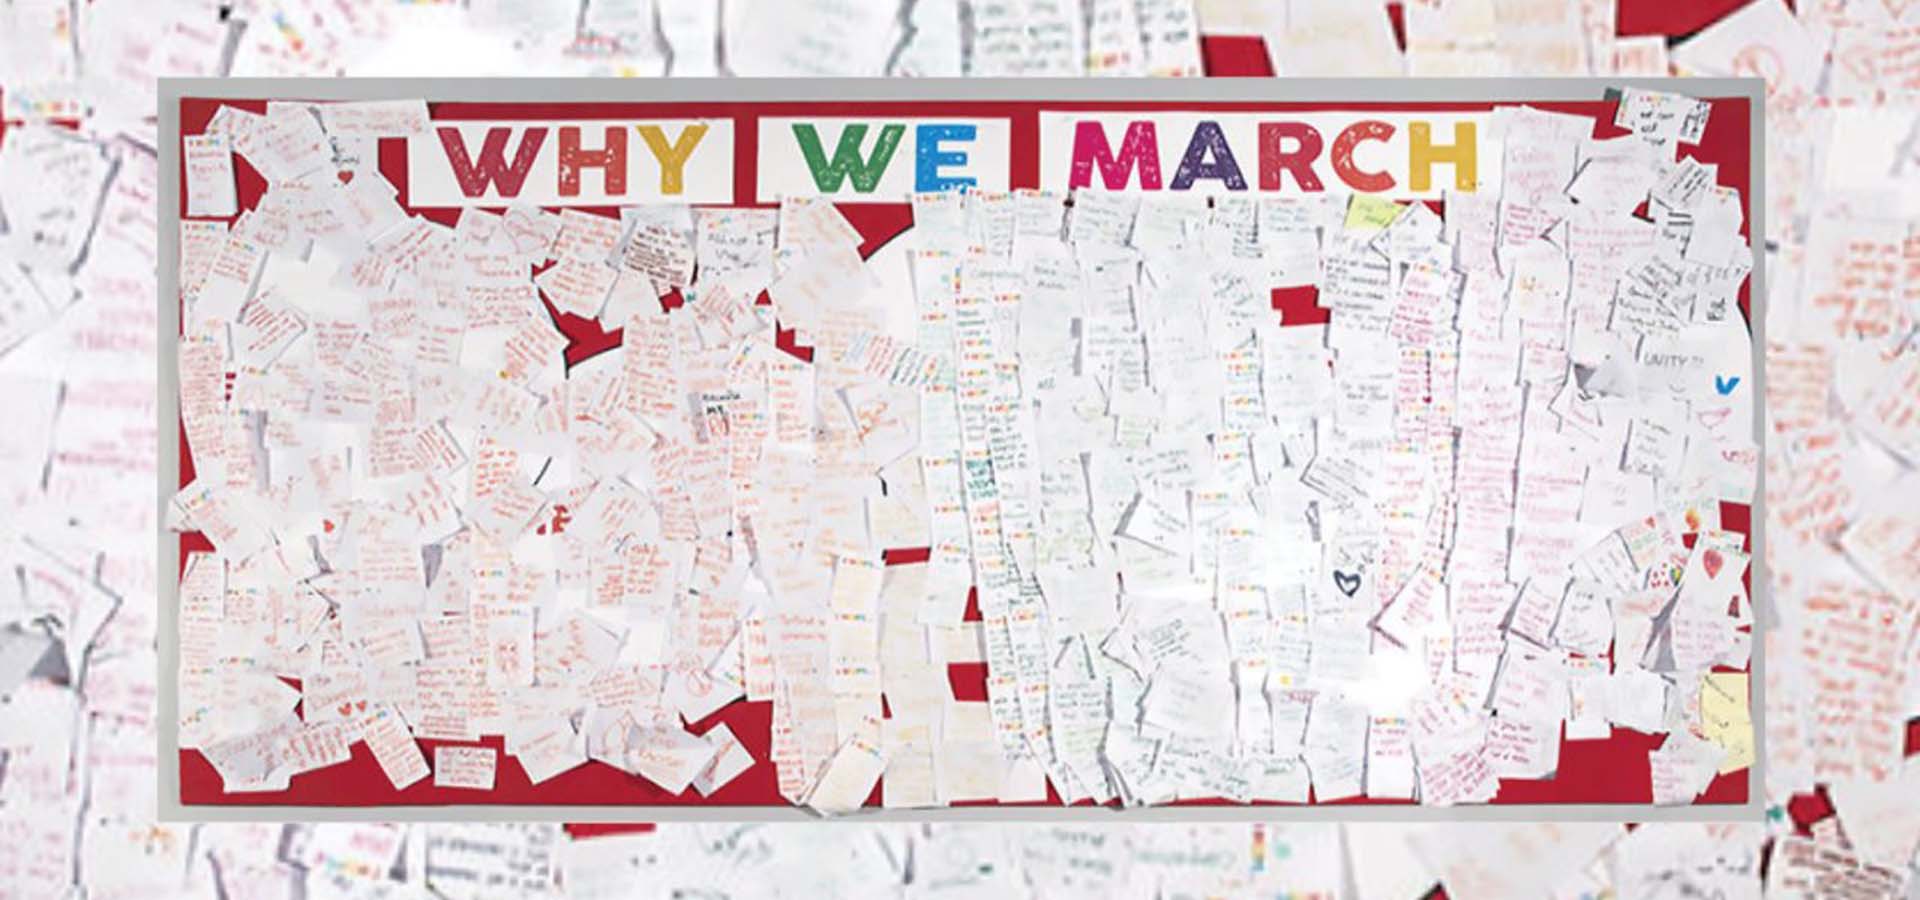 Bulletin board with hundreds of notes posted on it under a heading reading 'Why We March."